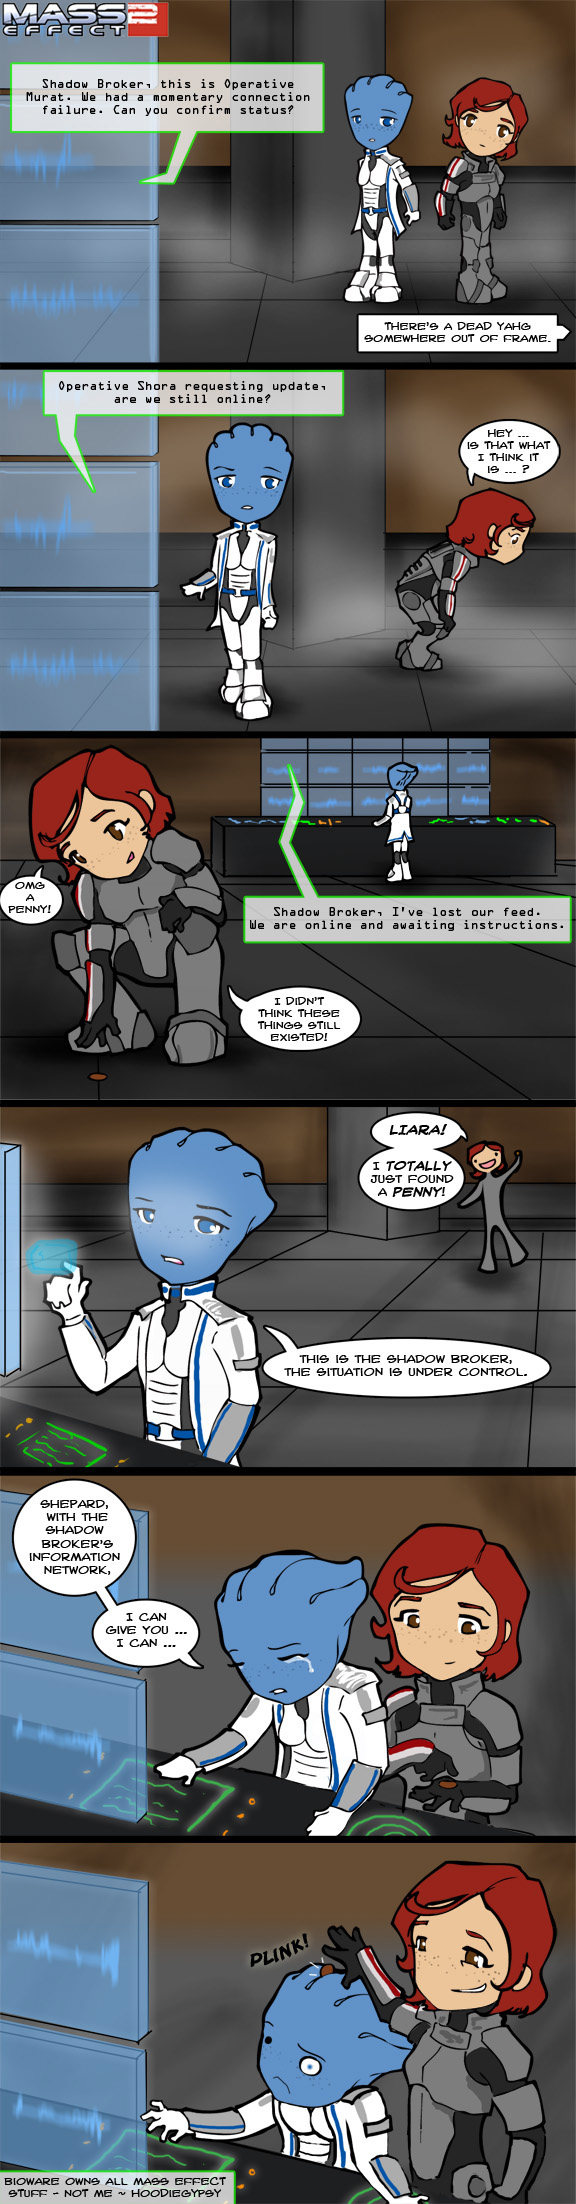 shepard_finds_a_penny_by_hoodie_gypsy-d4vo7v7.jpg